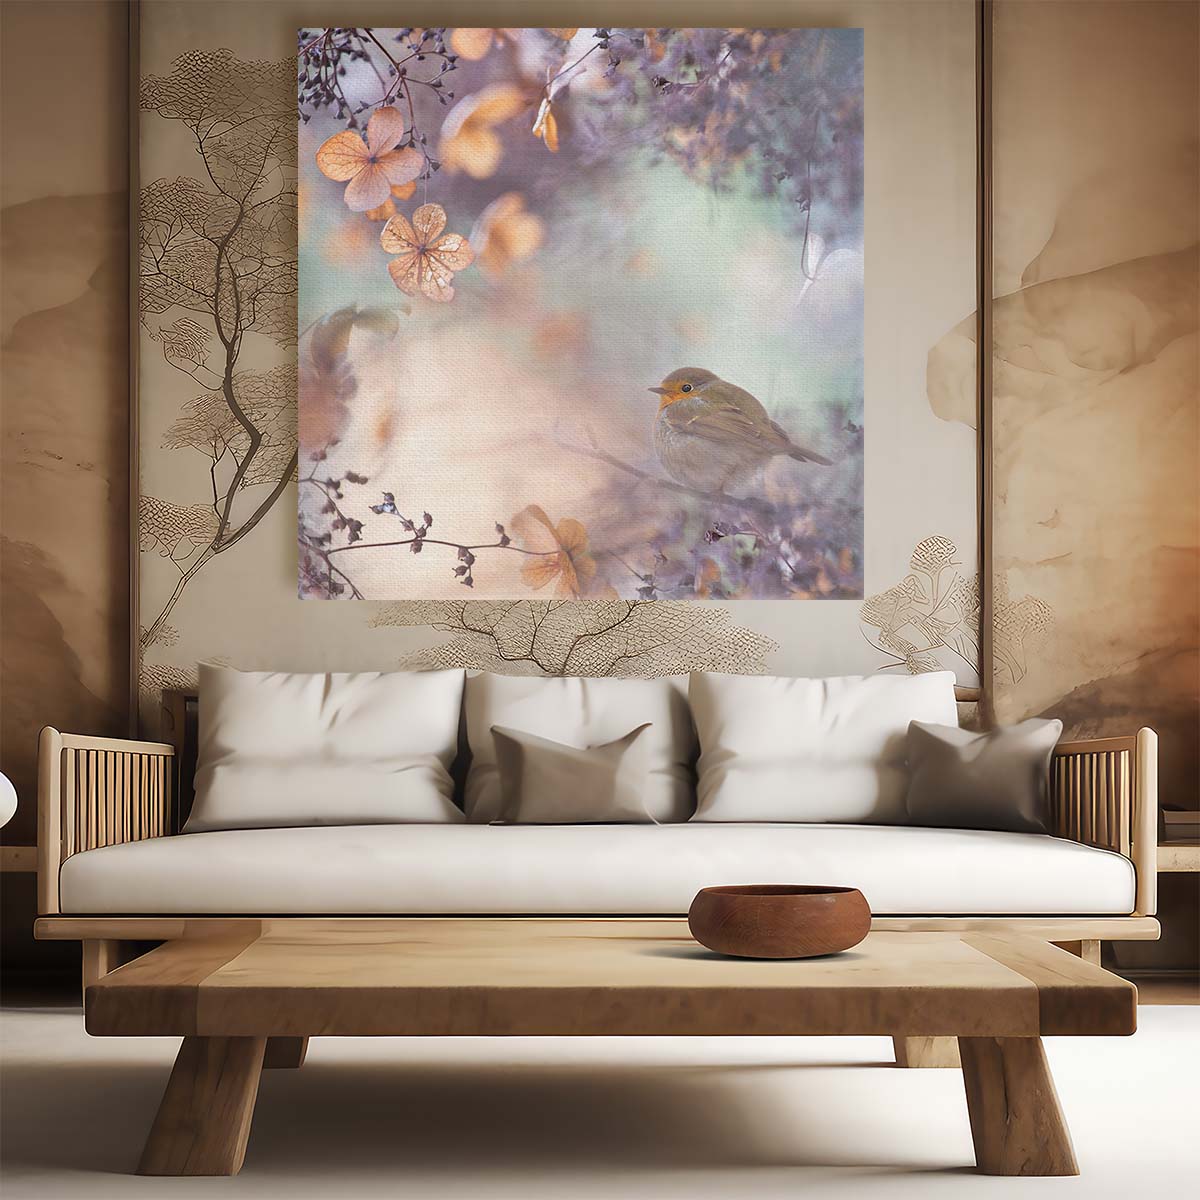 Dreamy Enchanted Winter Hydrangea & Robin Floral Photography Wall Art by Luxuriance Designs. Made in USA.